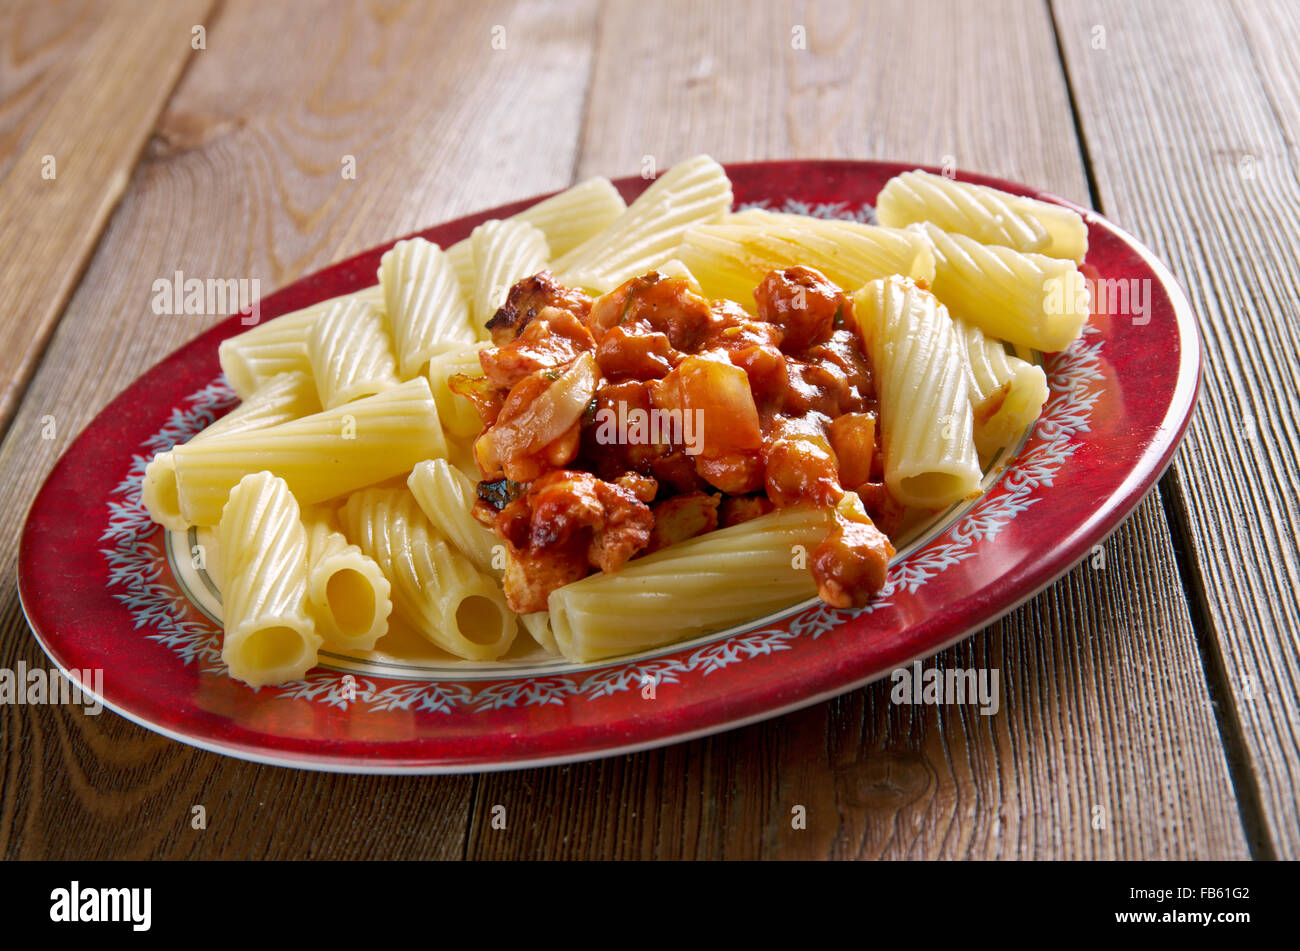 Rigatoni with chicken and Alfred’s Meat Sauce Stock Photo